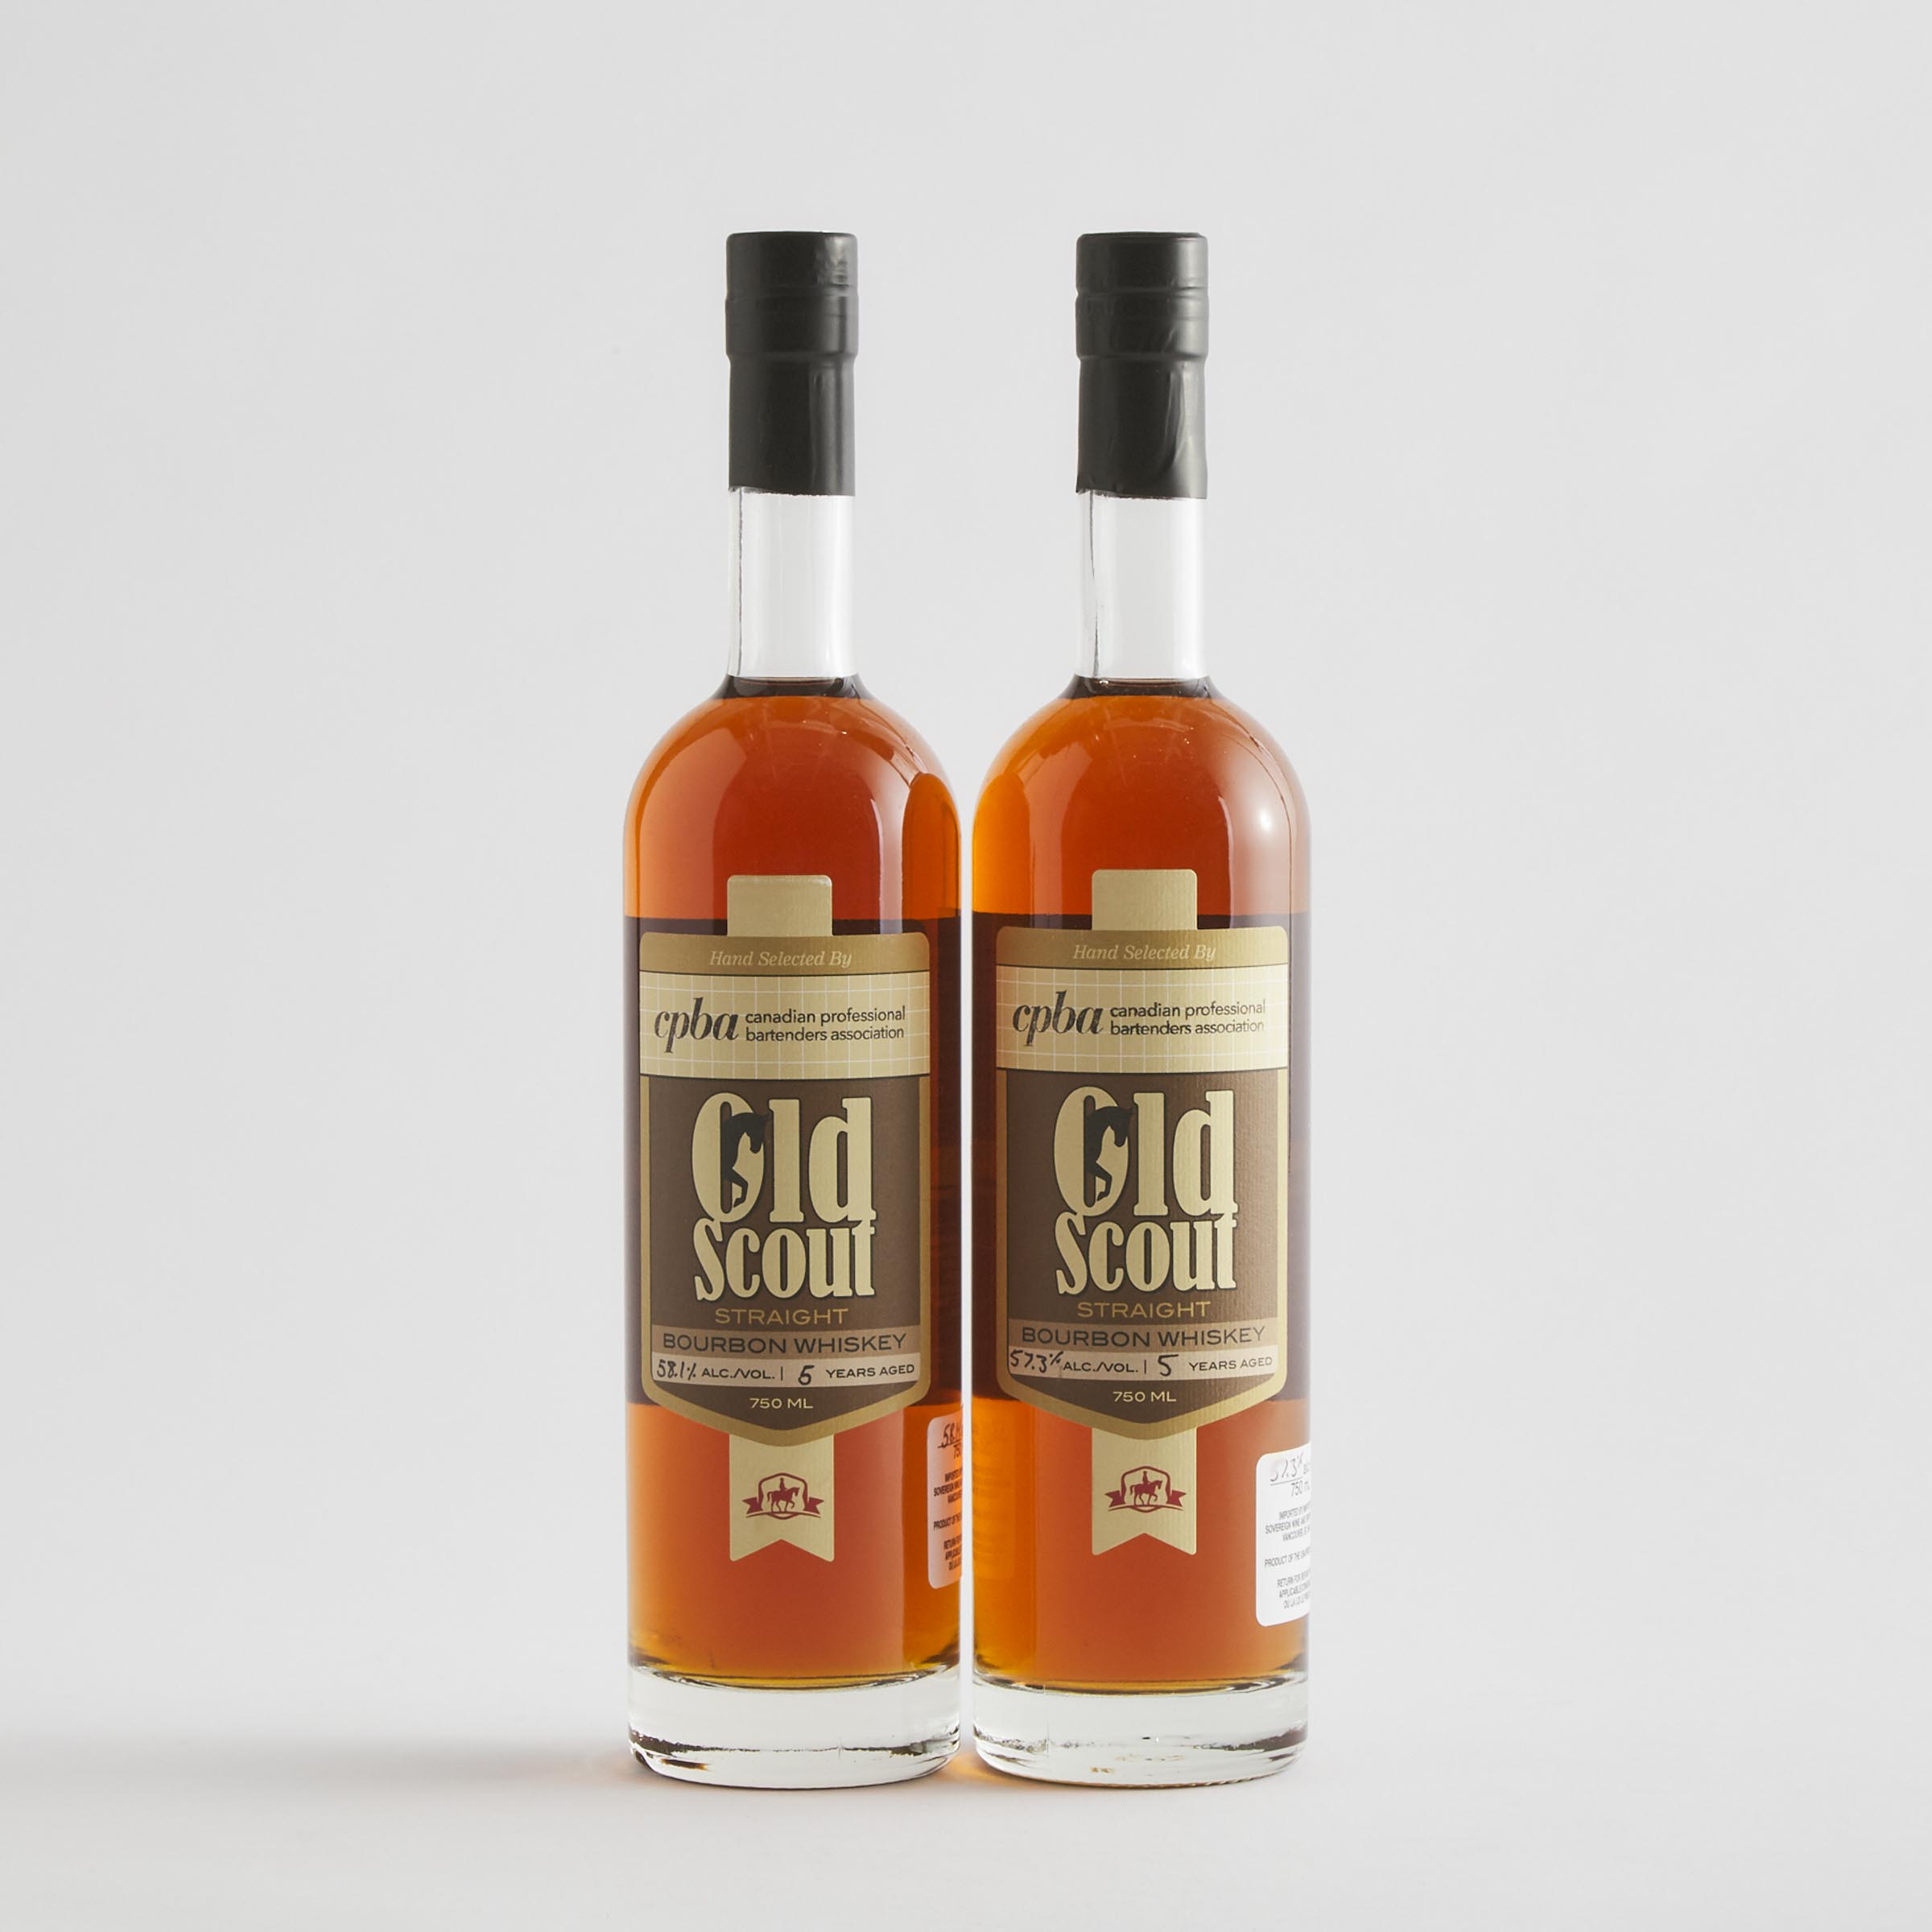 OLD SCOUT STRAIGHT BOURBON WHISKEY 5 YEARS (ONE 750 ML)
OLD SCOUT STRAIGHT BOURBON WHISKEY 5 YEARS (ONE 750 ML)